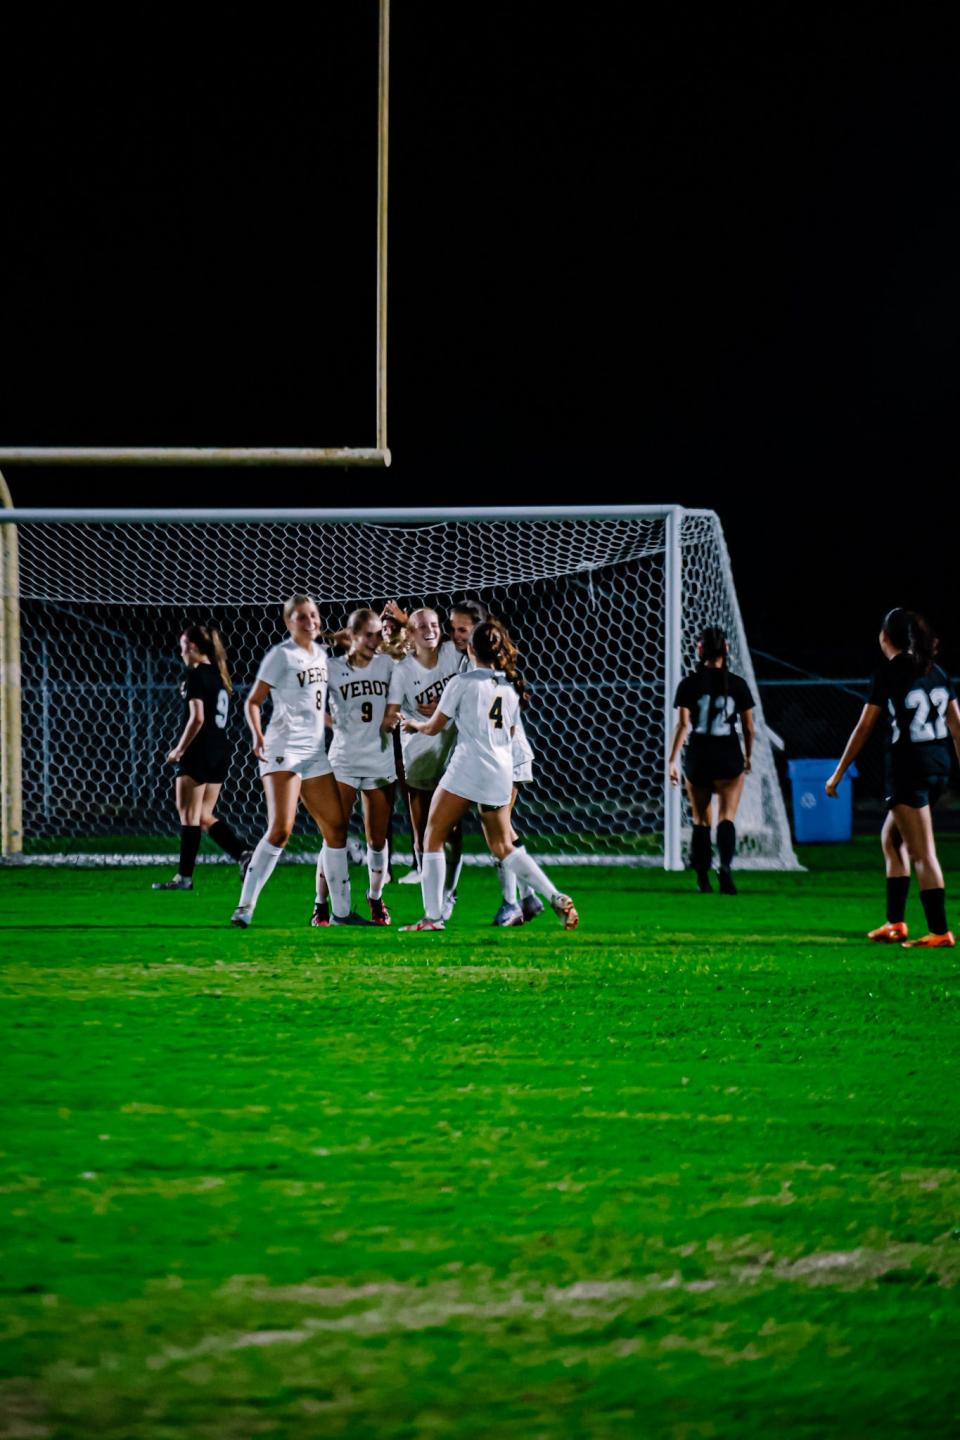 Bishop Verot traveled to Mariner on Tuesday, Nov. 14 and picked up a 1-0 girls soccer win over the Tritons.